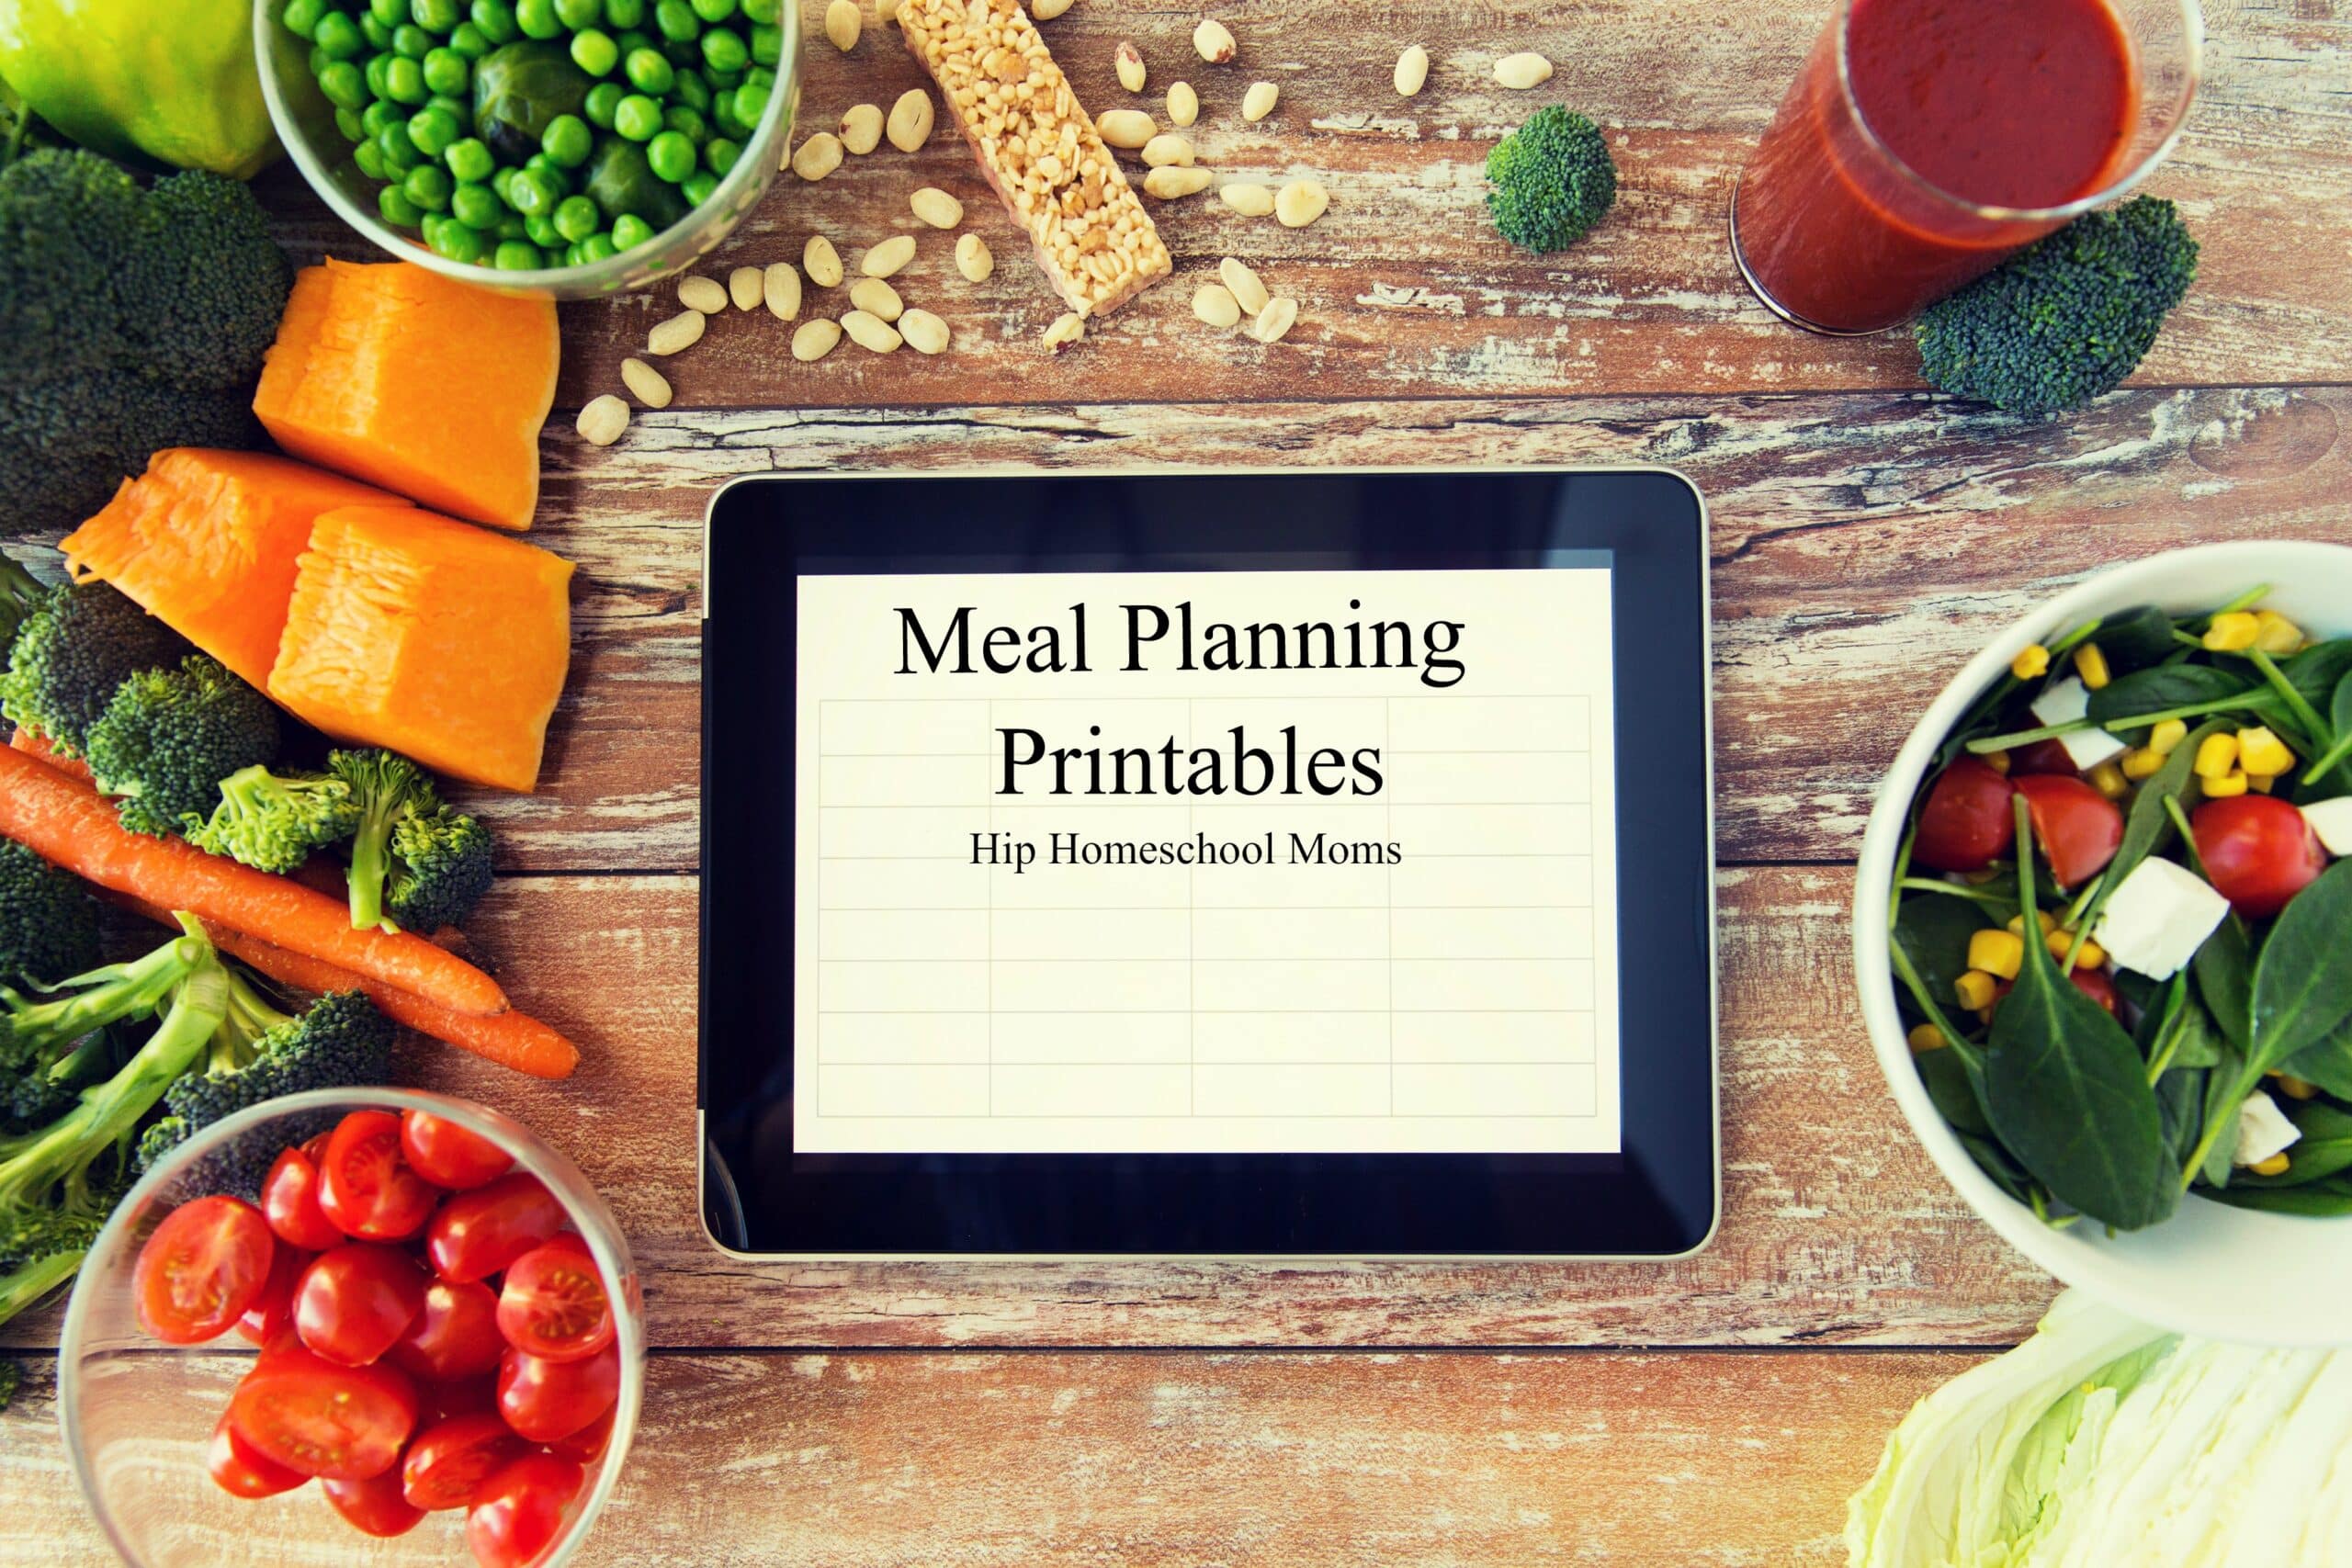 HHM Adobe Meal Planning